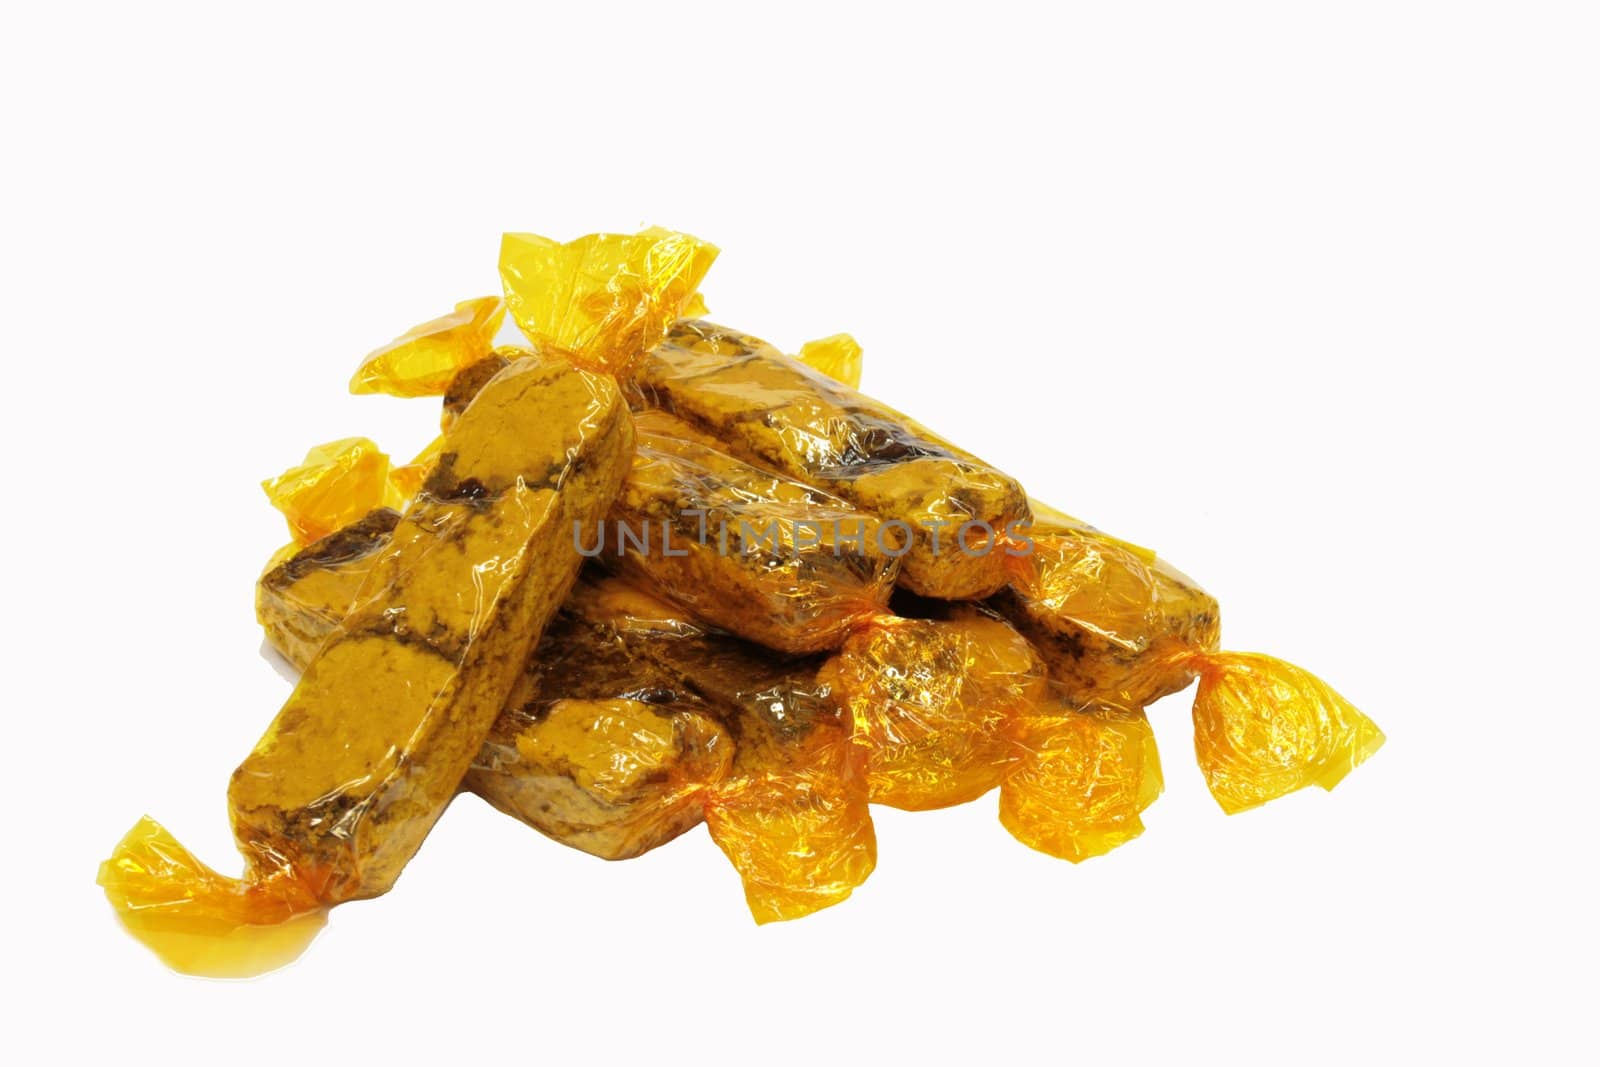 oatmeal bar cookies individually wrapped in yellow cellophane
